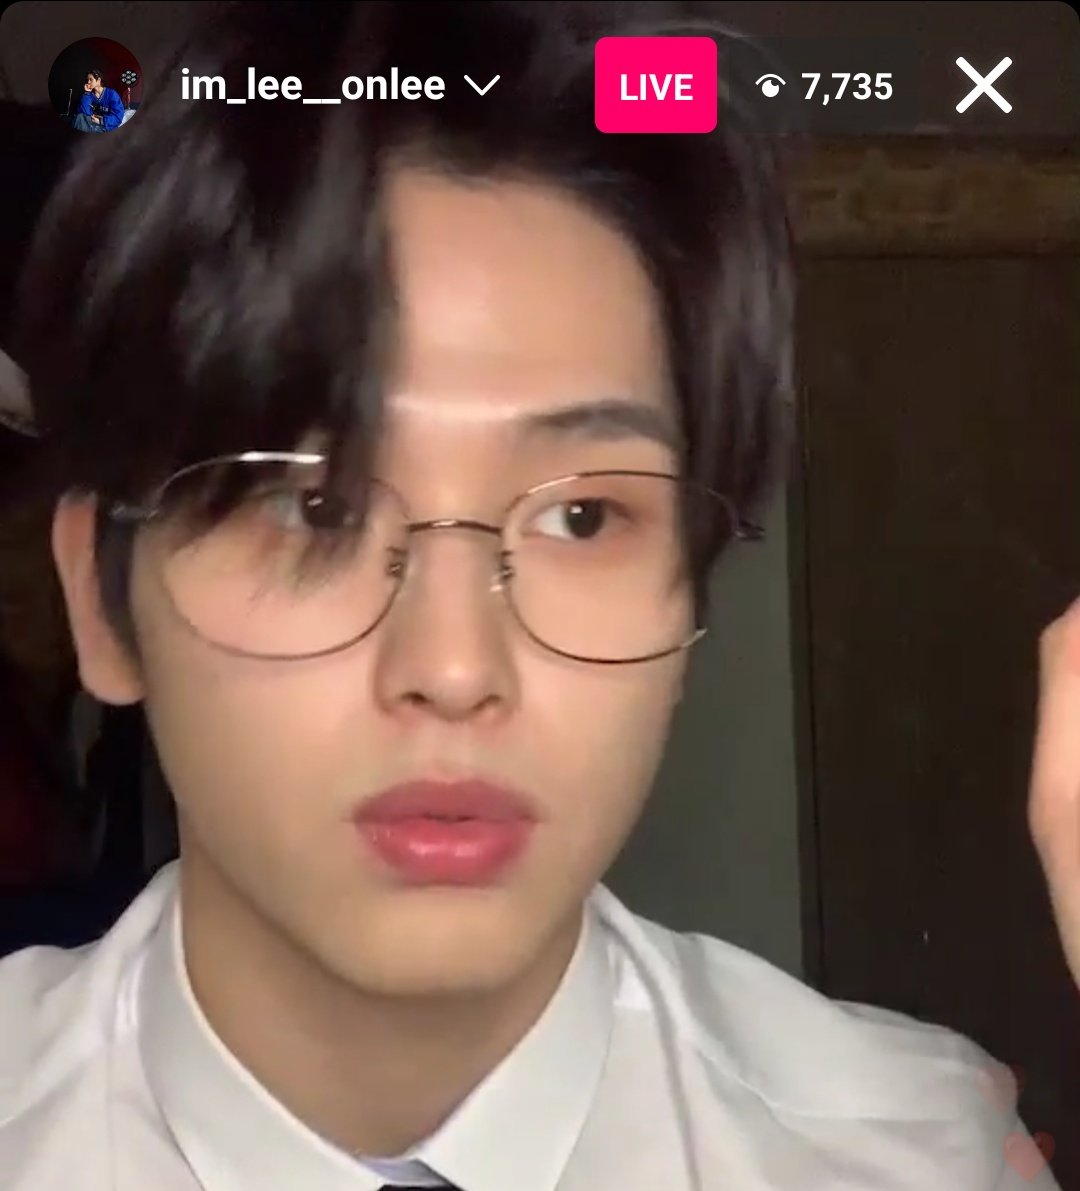 Who allowed Seunghwan to look like this?!? The specs look amazing on him!